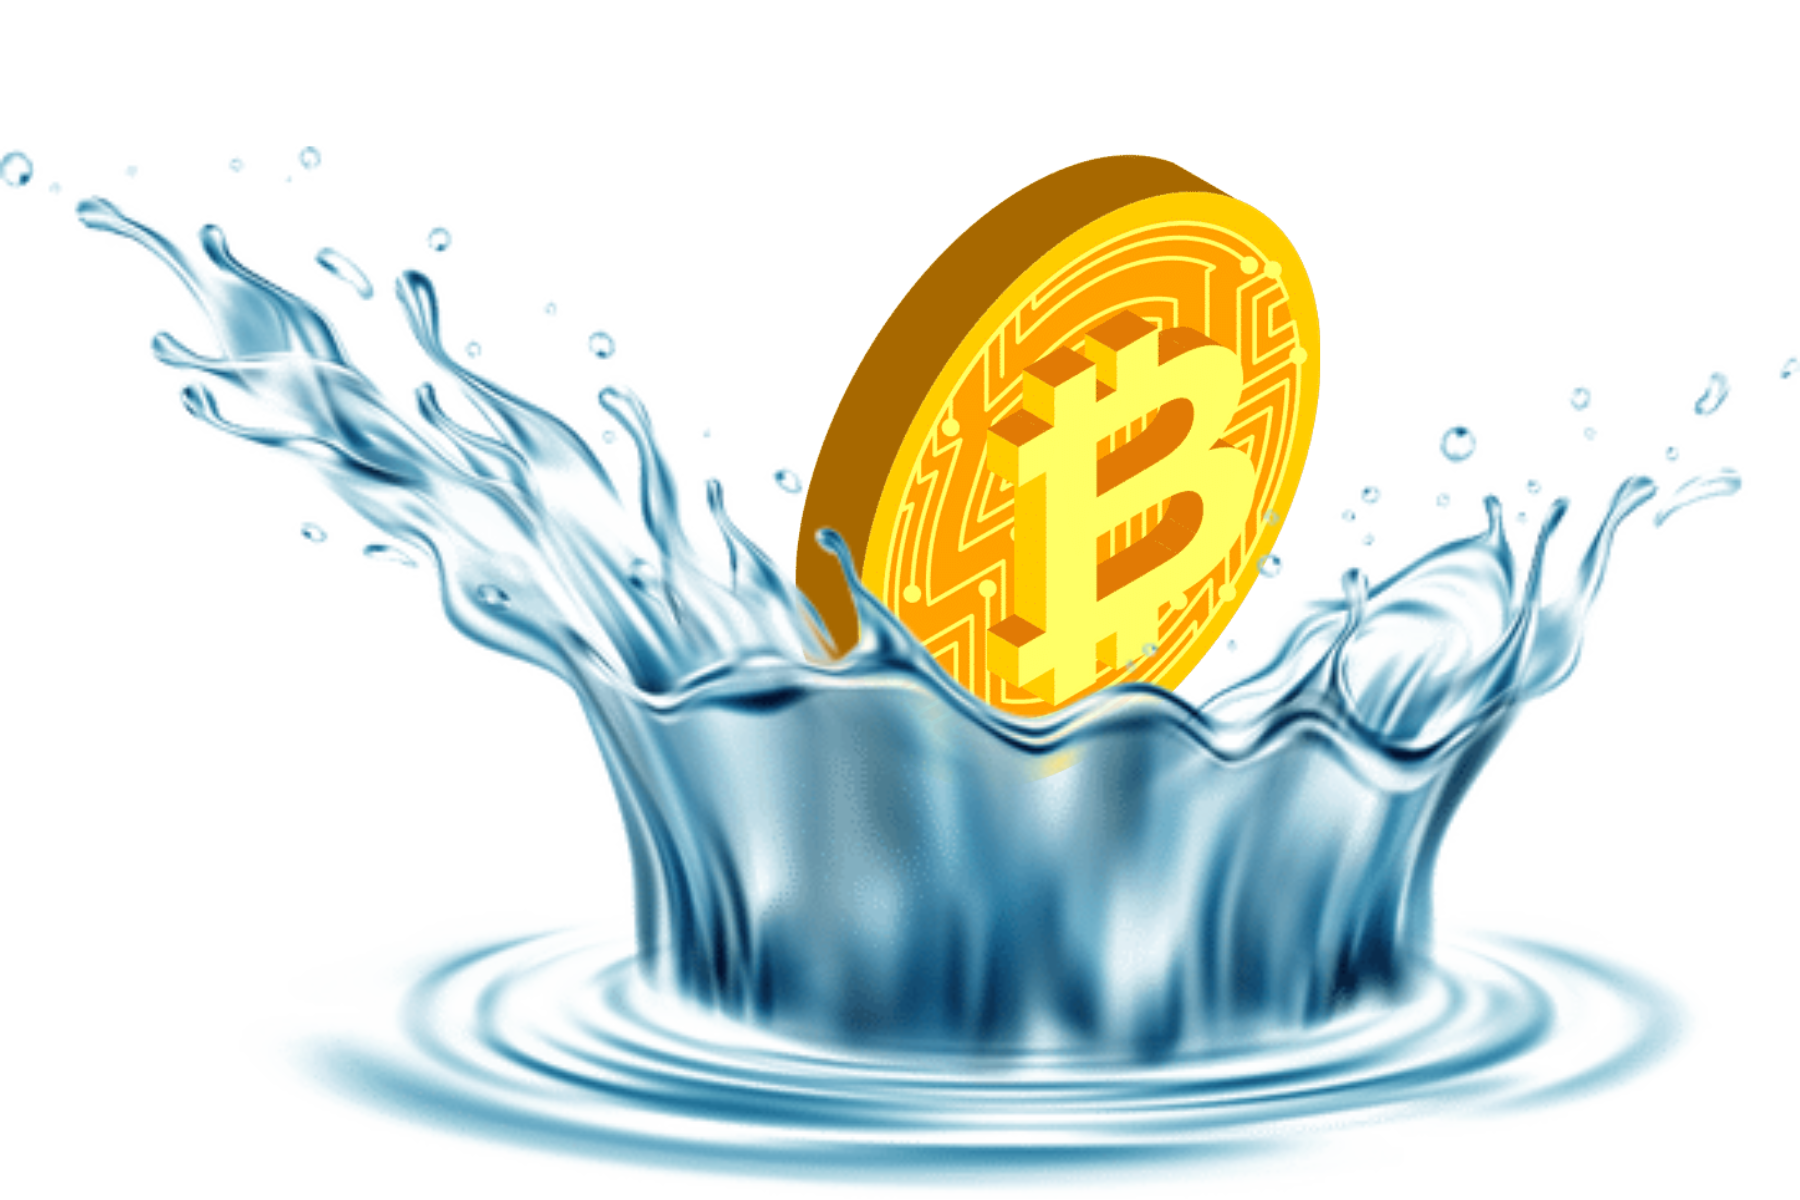 A Bitcoin floating on water